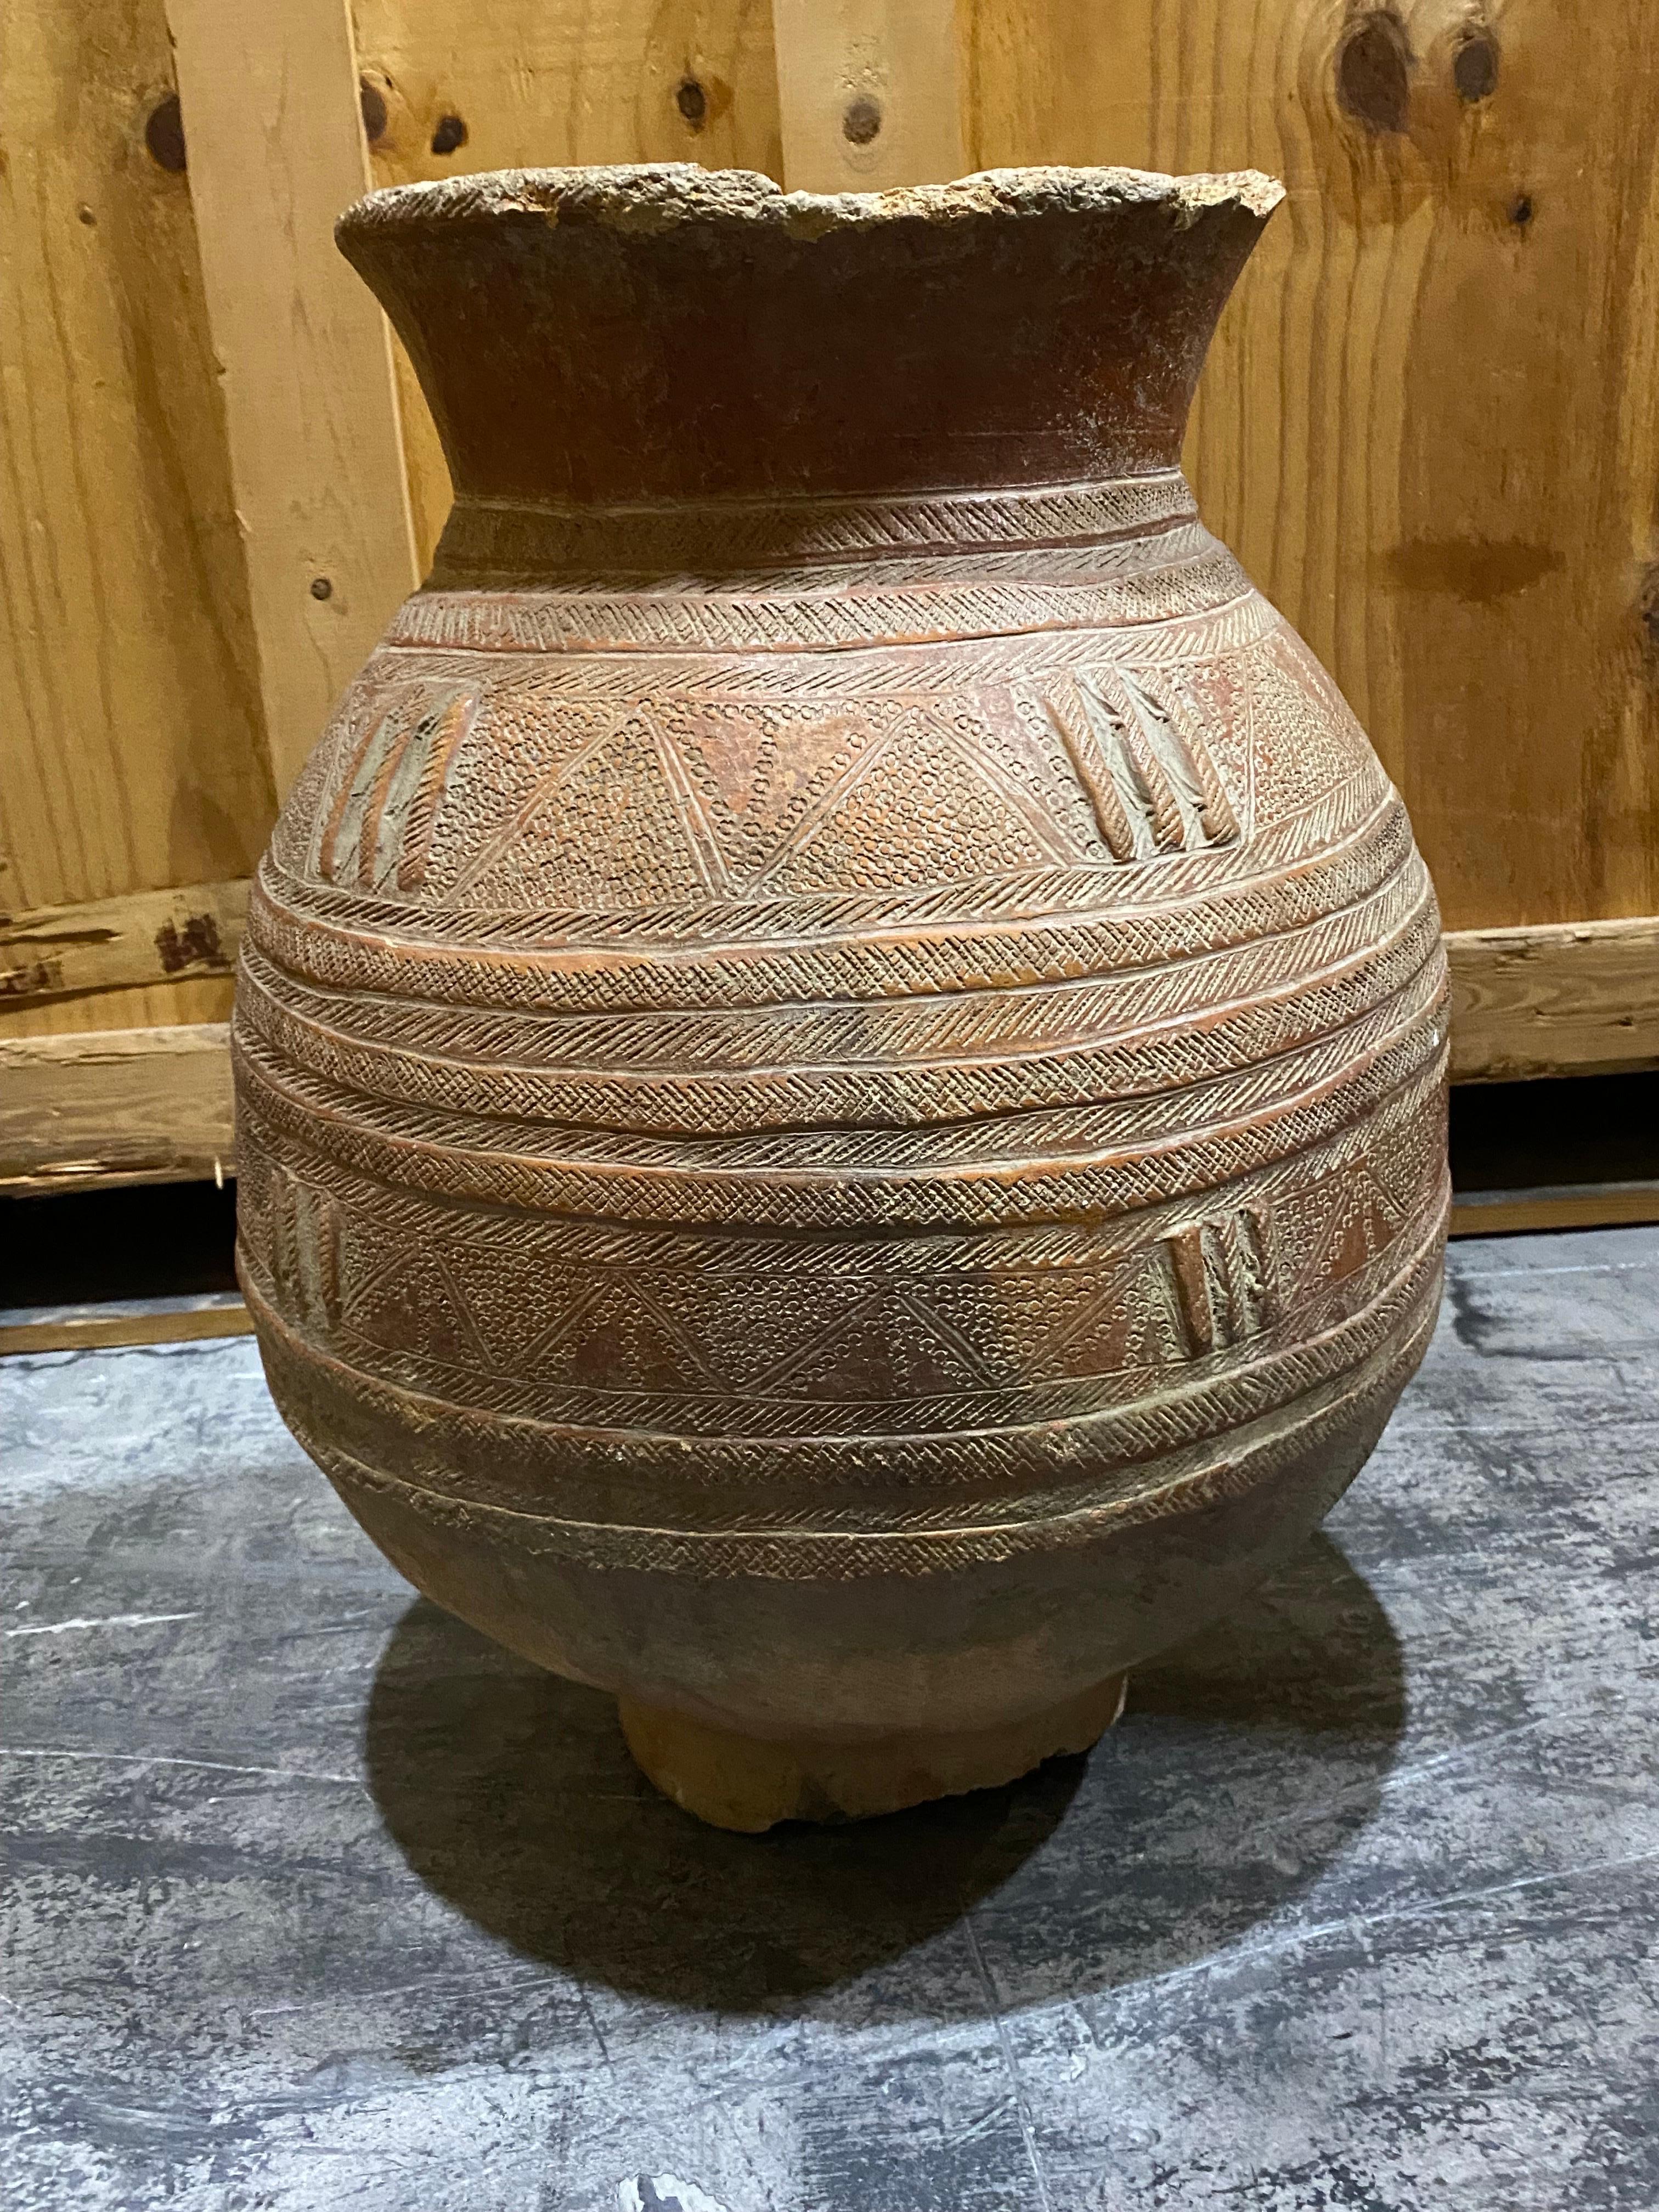 Unknown 18th C. Terracotta Jar with Incised Design